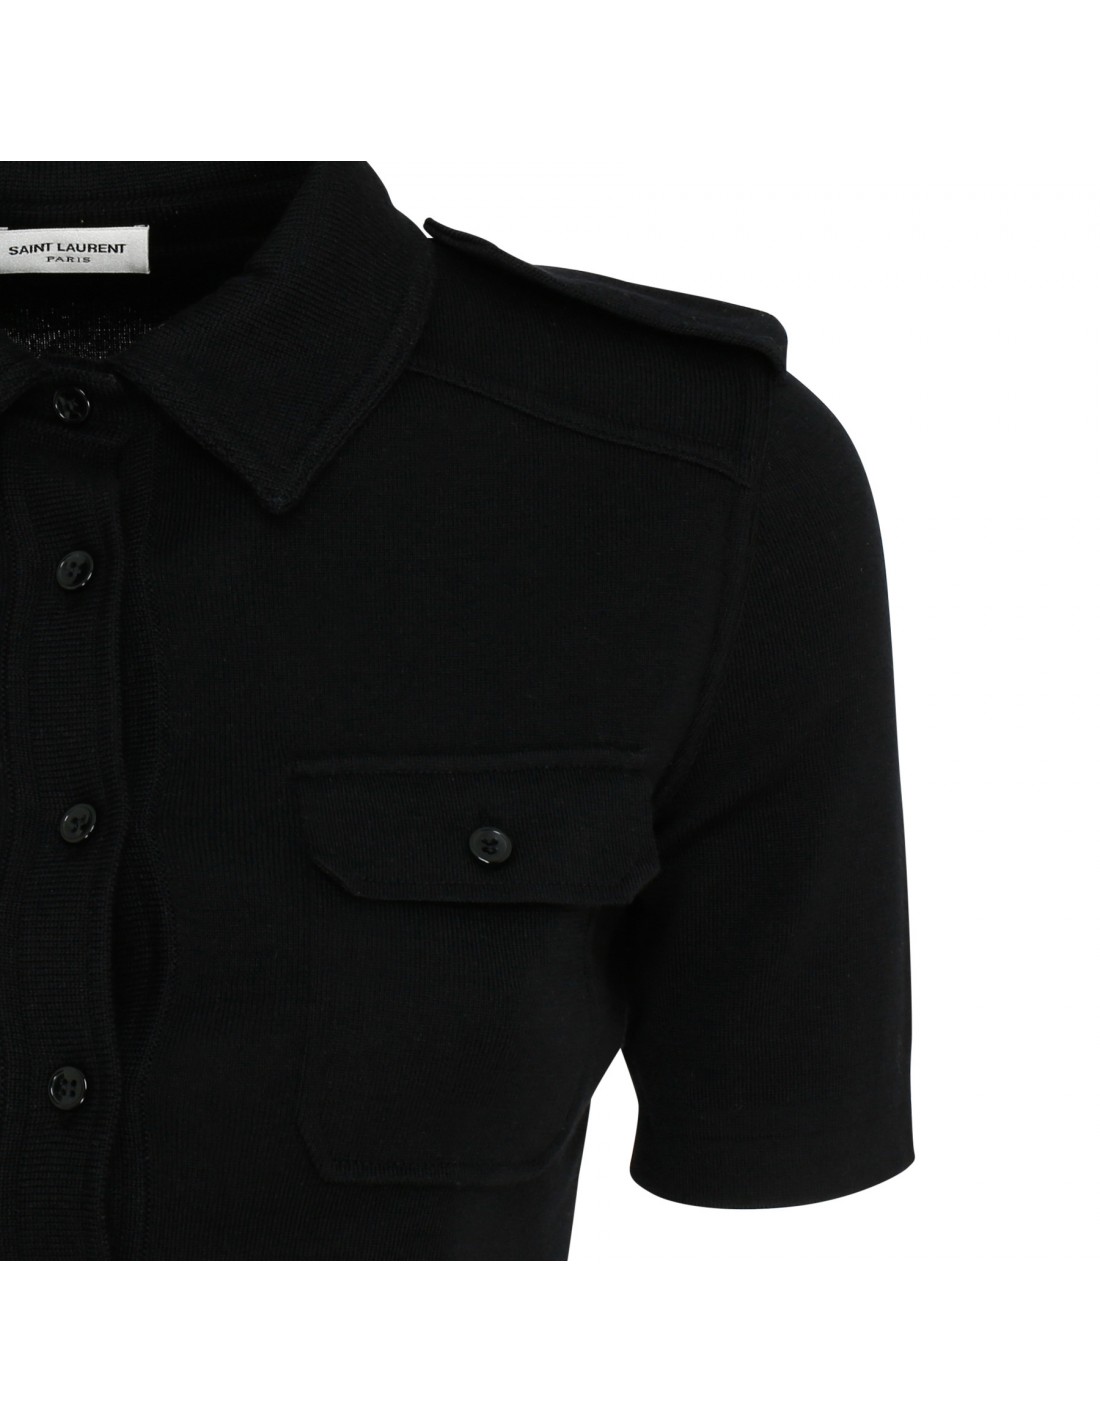 Black wool and cotton polo